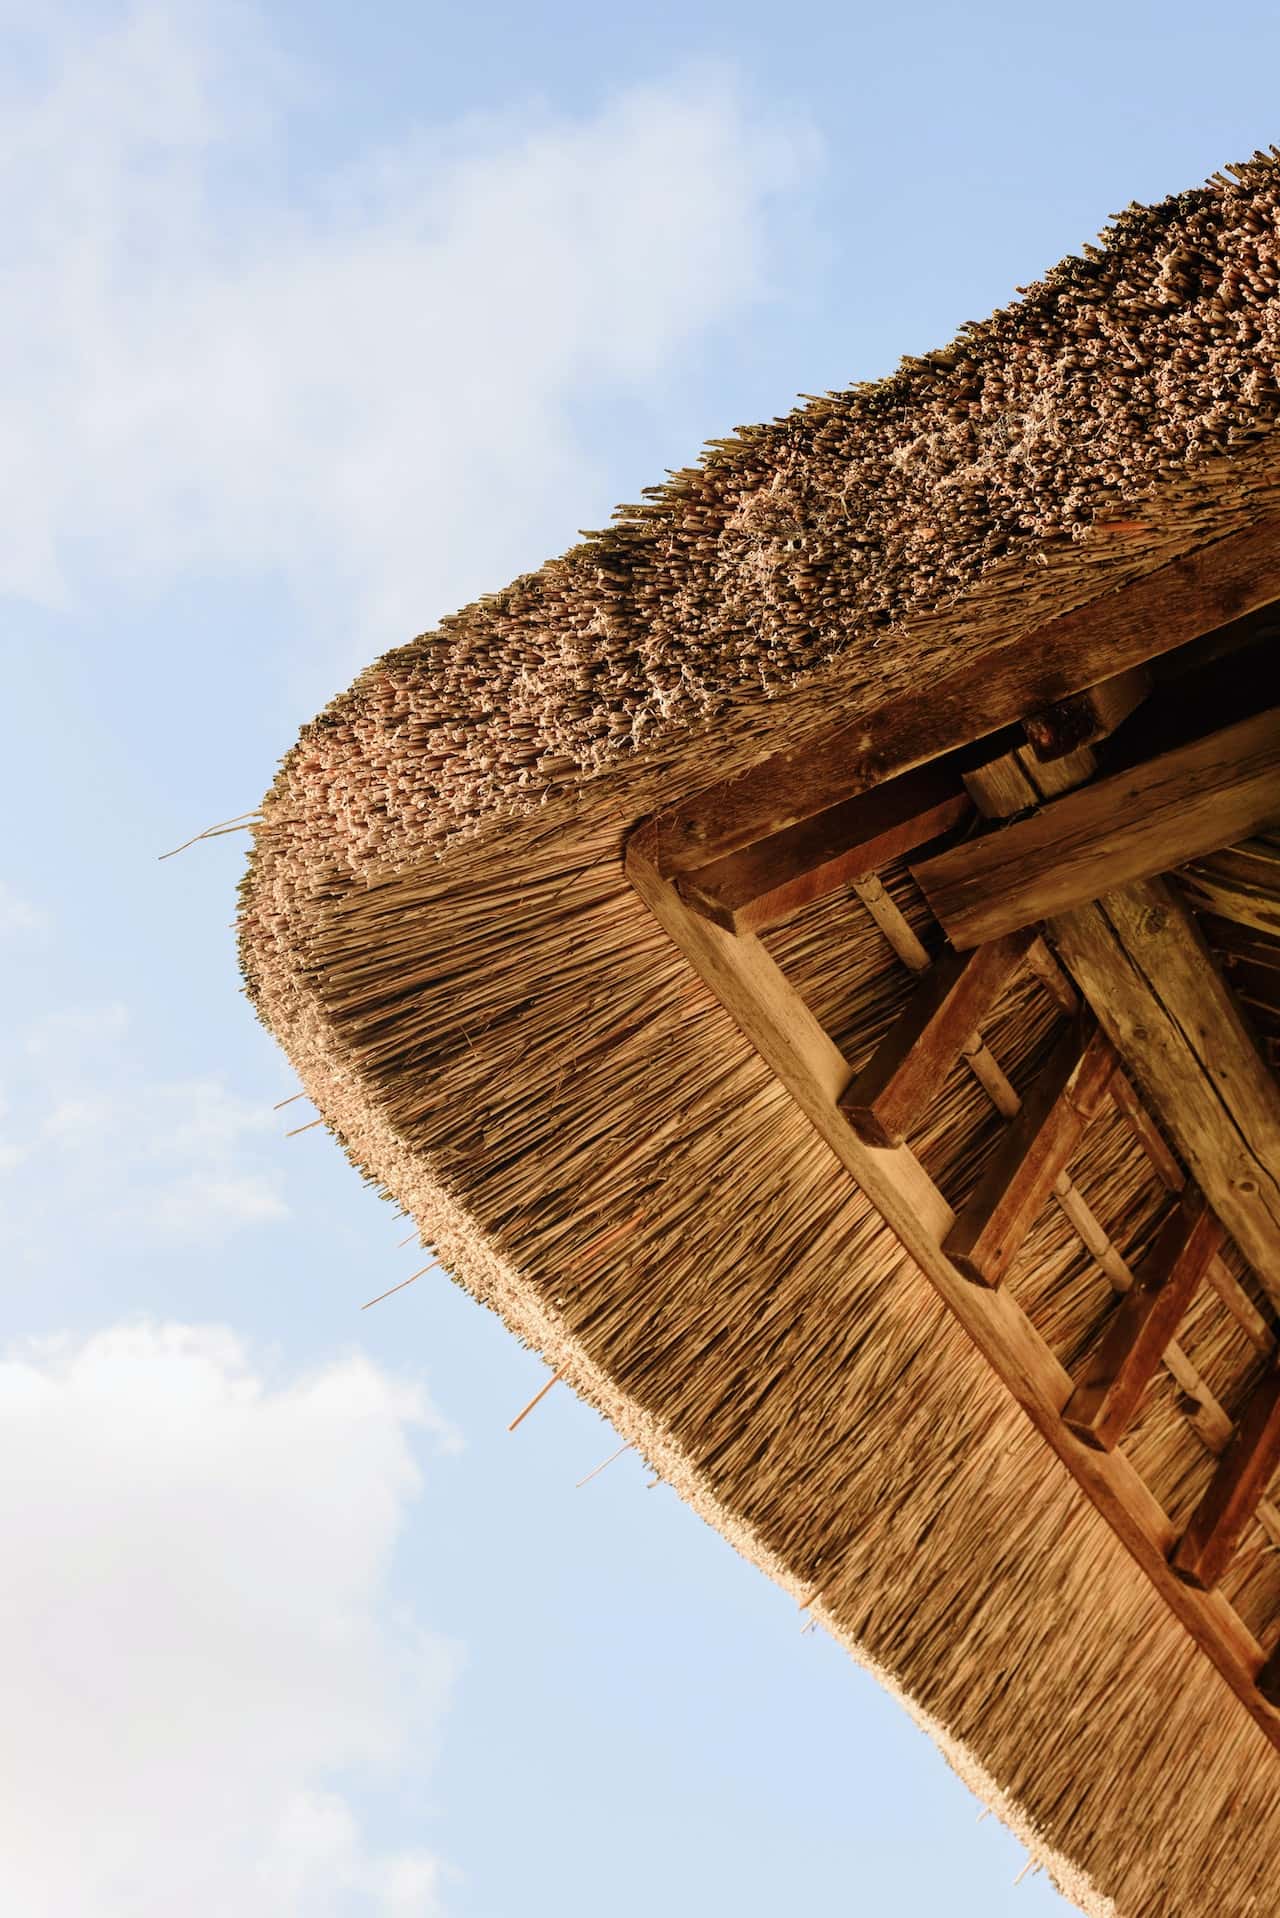 thatched interior design to prevent fire